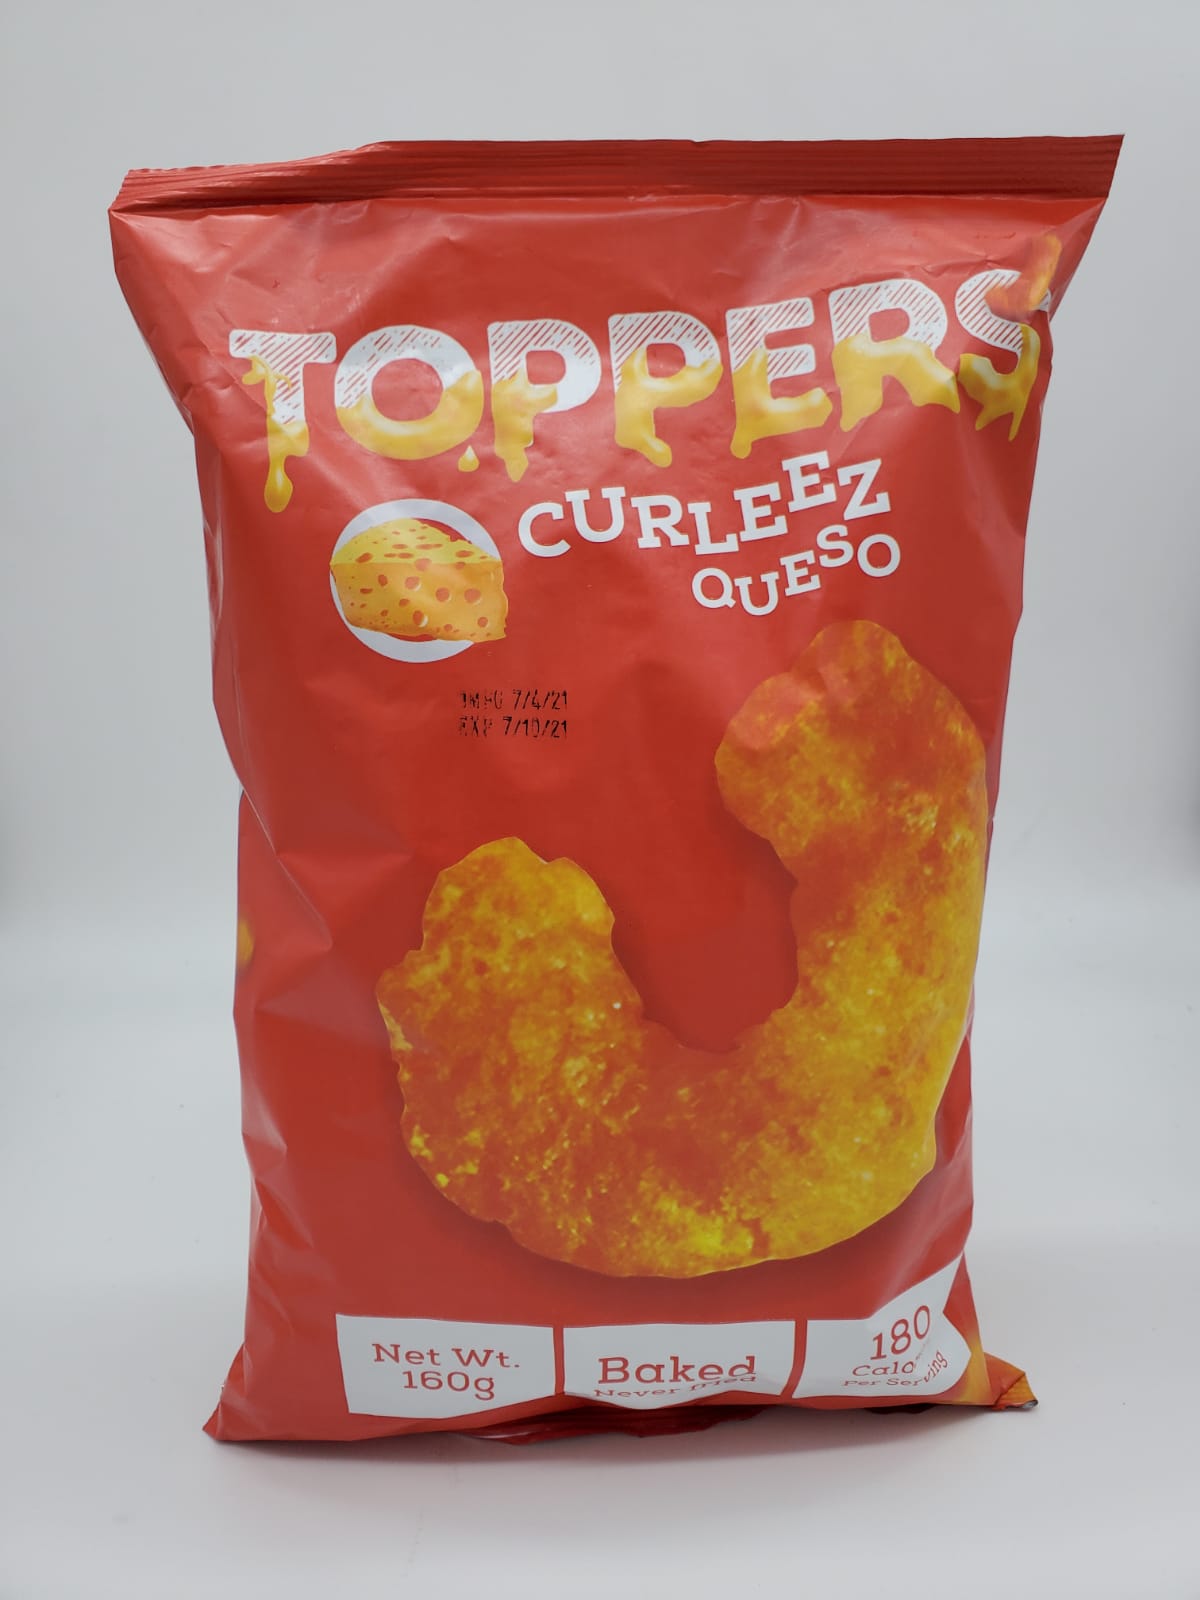 TOPPERS CURLEEZ 160G